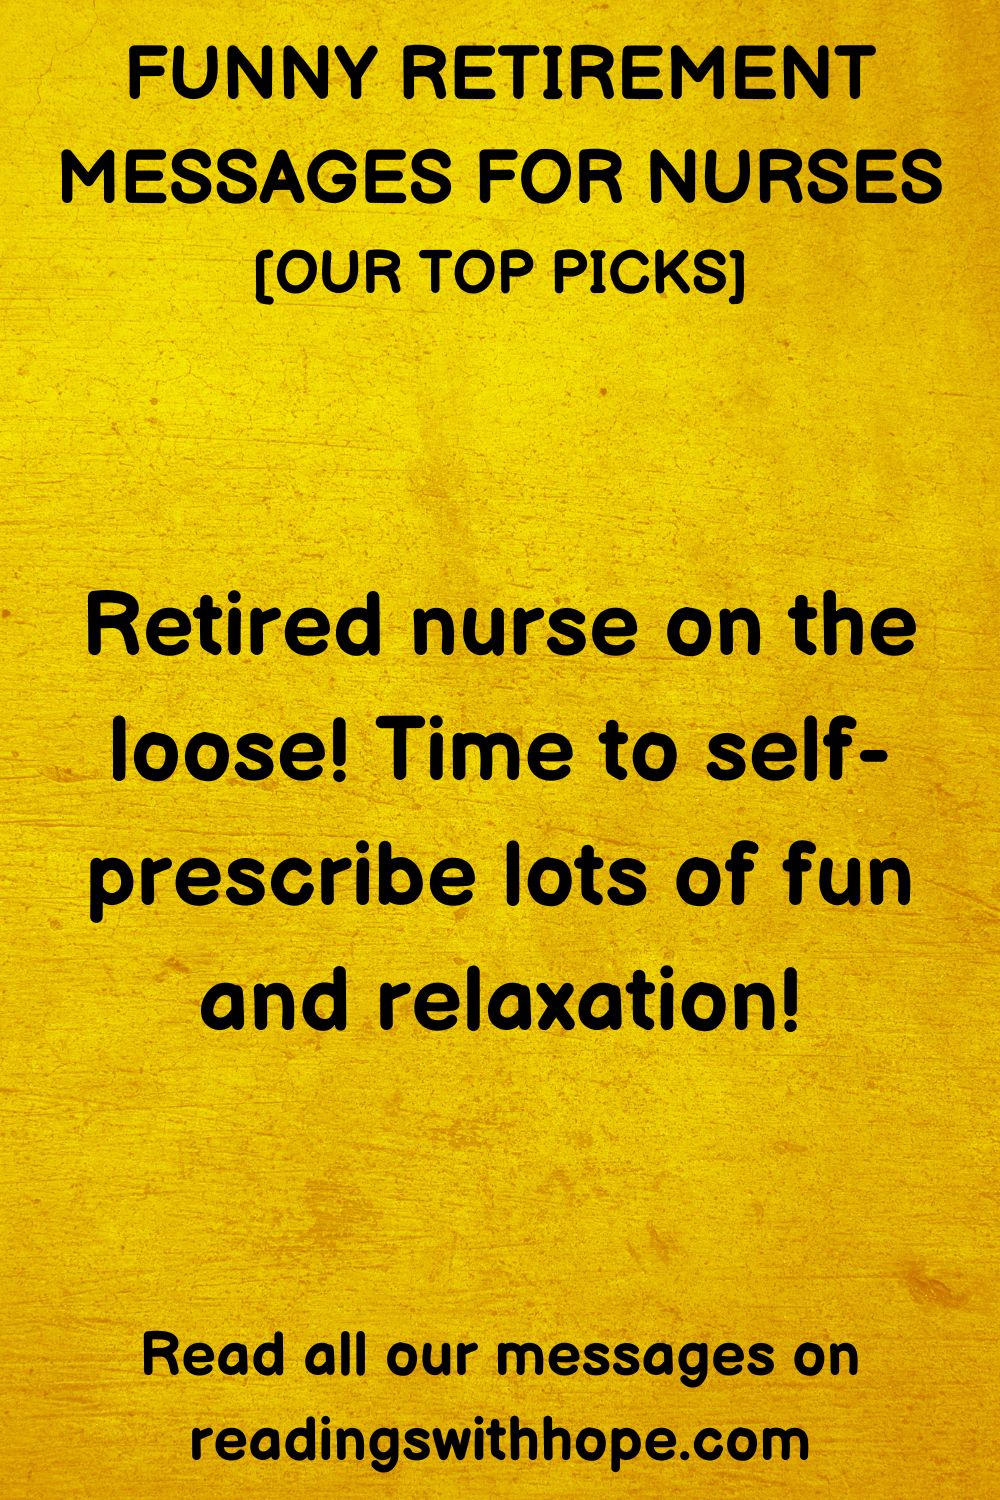 Funny Retirement Message For a Nurse